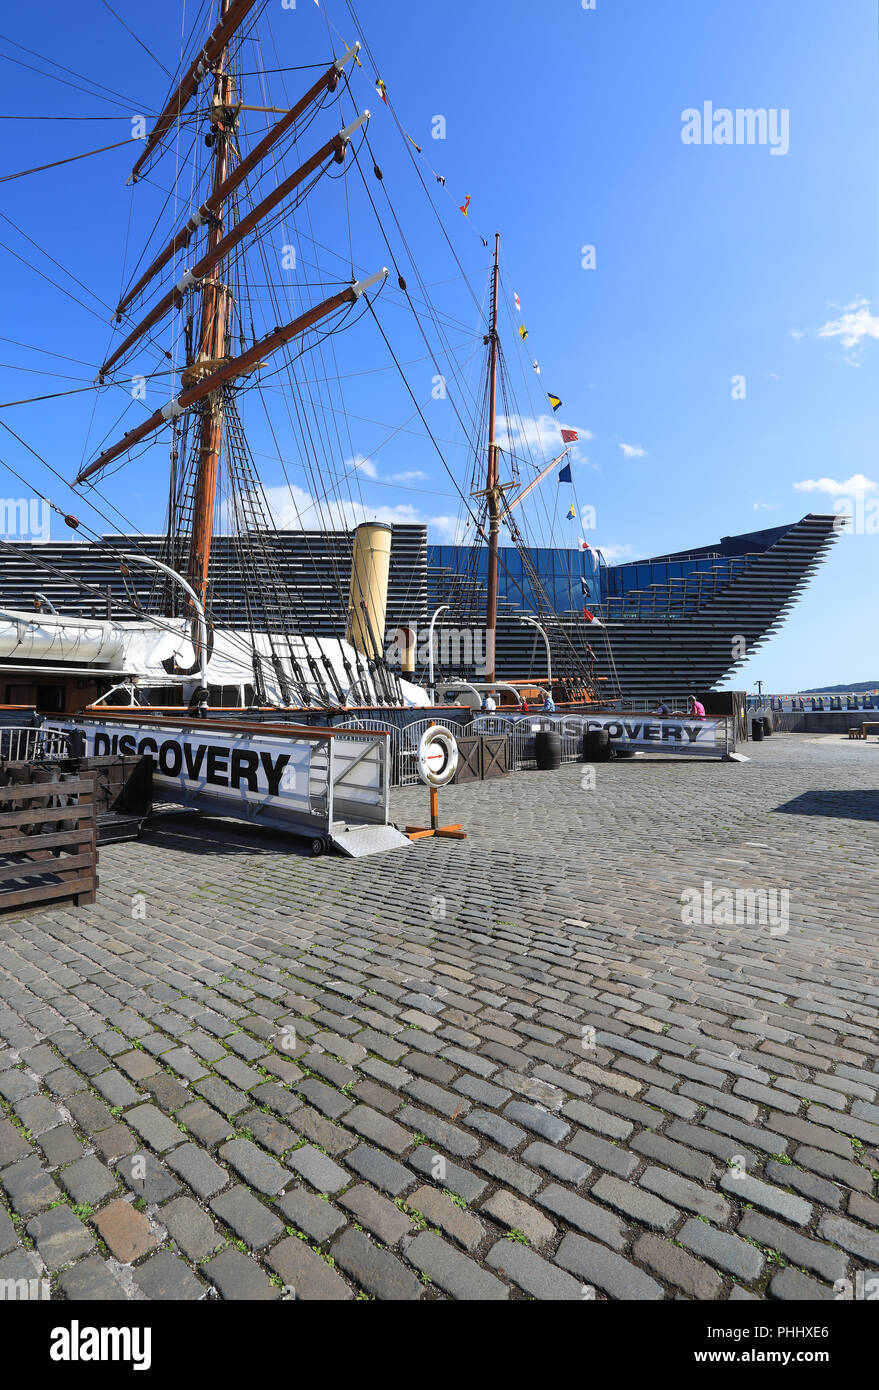 The RRS Discovery ship with Kengo Kuma's new V&A Dundee behind, on the city's waterfront, in Scotland, UK Stock Photo